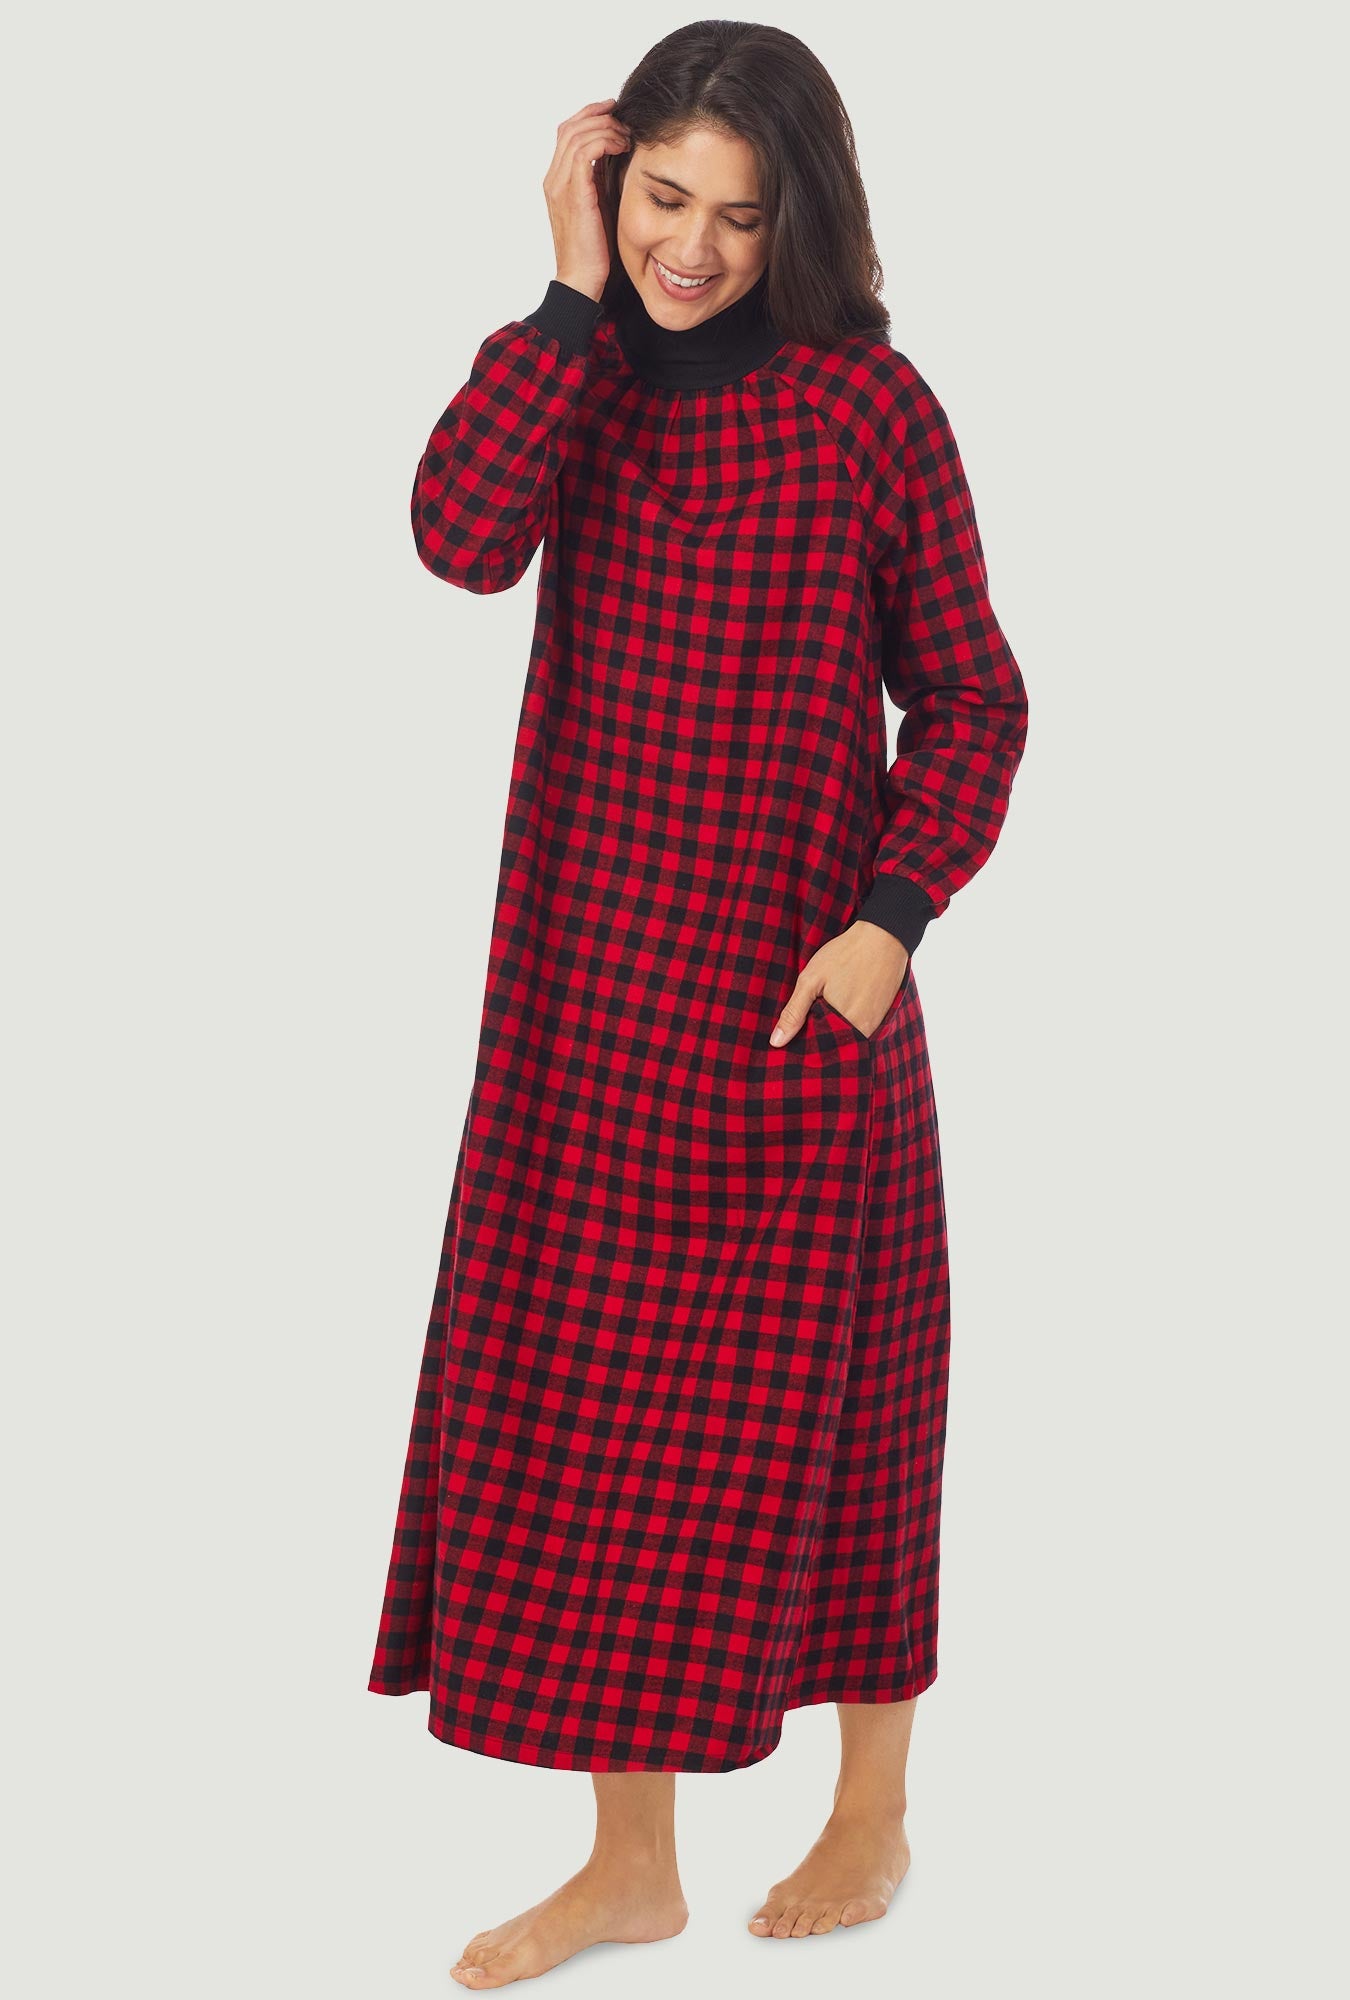 A lady wearing a red buffalo check long sleeve pop over flannel gown.